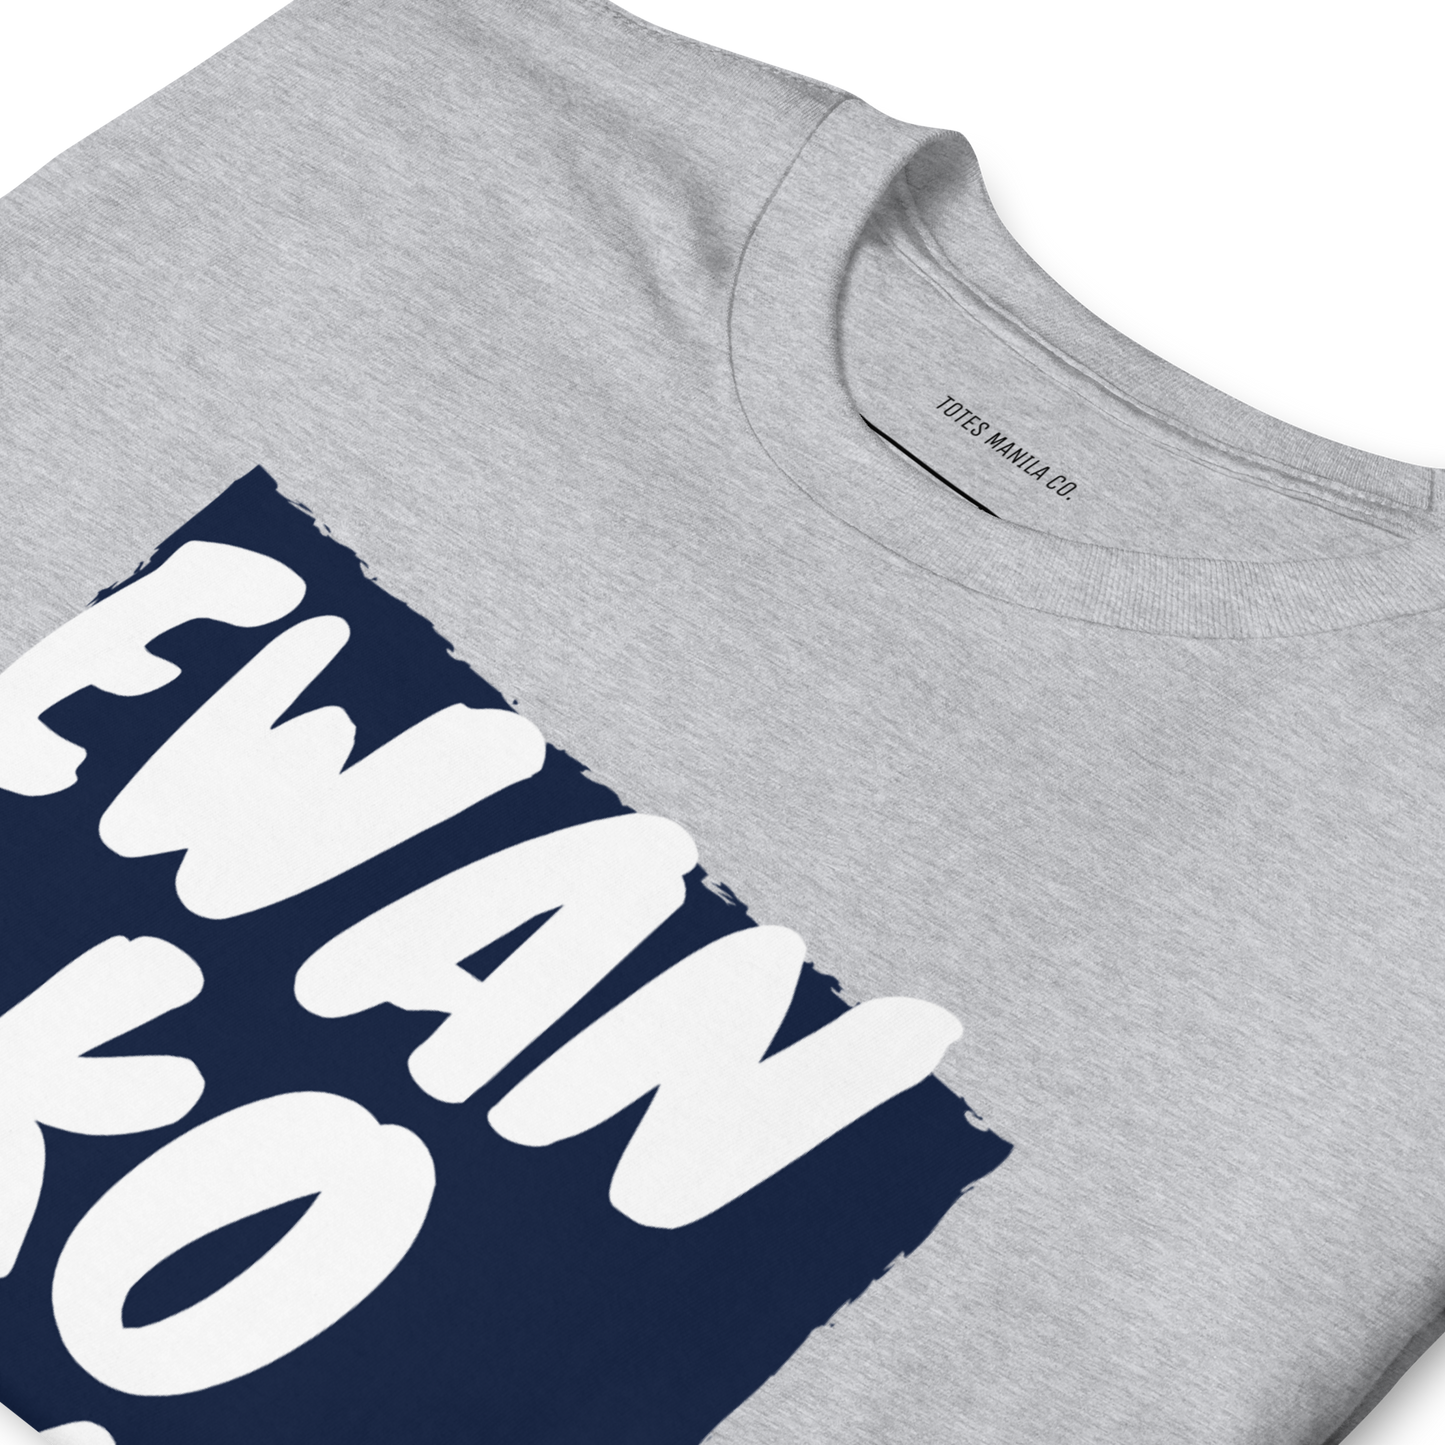 Close up of the Ewan Ko Sayo! design printed on the center chest of a gray unisex shirt.